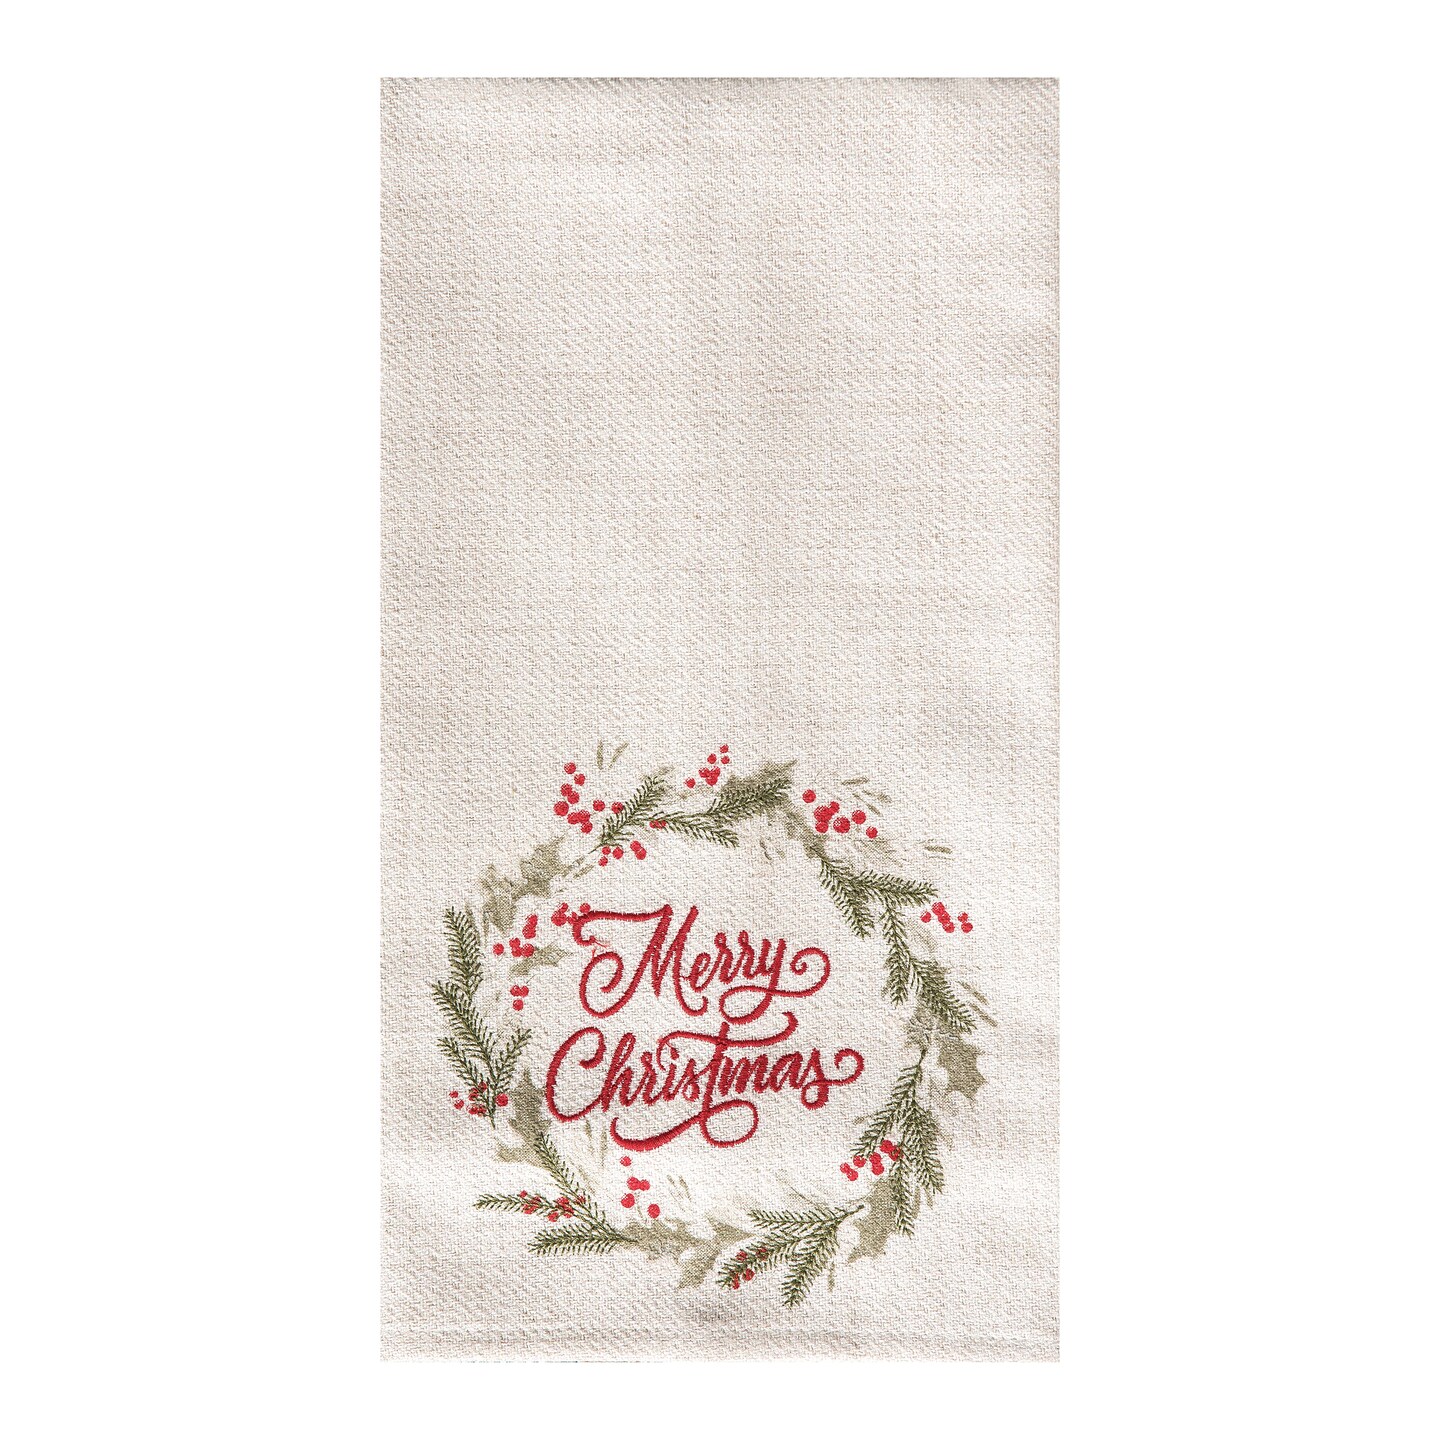 27&#x22; x 18&#x22; &#x22;Merry Christmas&#x22; Sentiment Holly Berry Winter Wreath Holiday Embellished Flour Sack Kitchen Dish Towel Decor